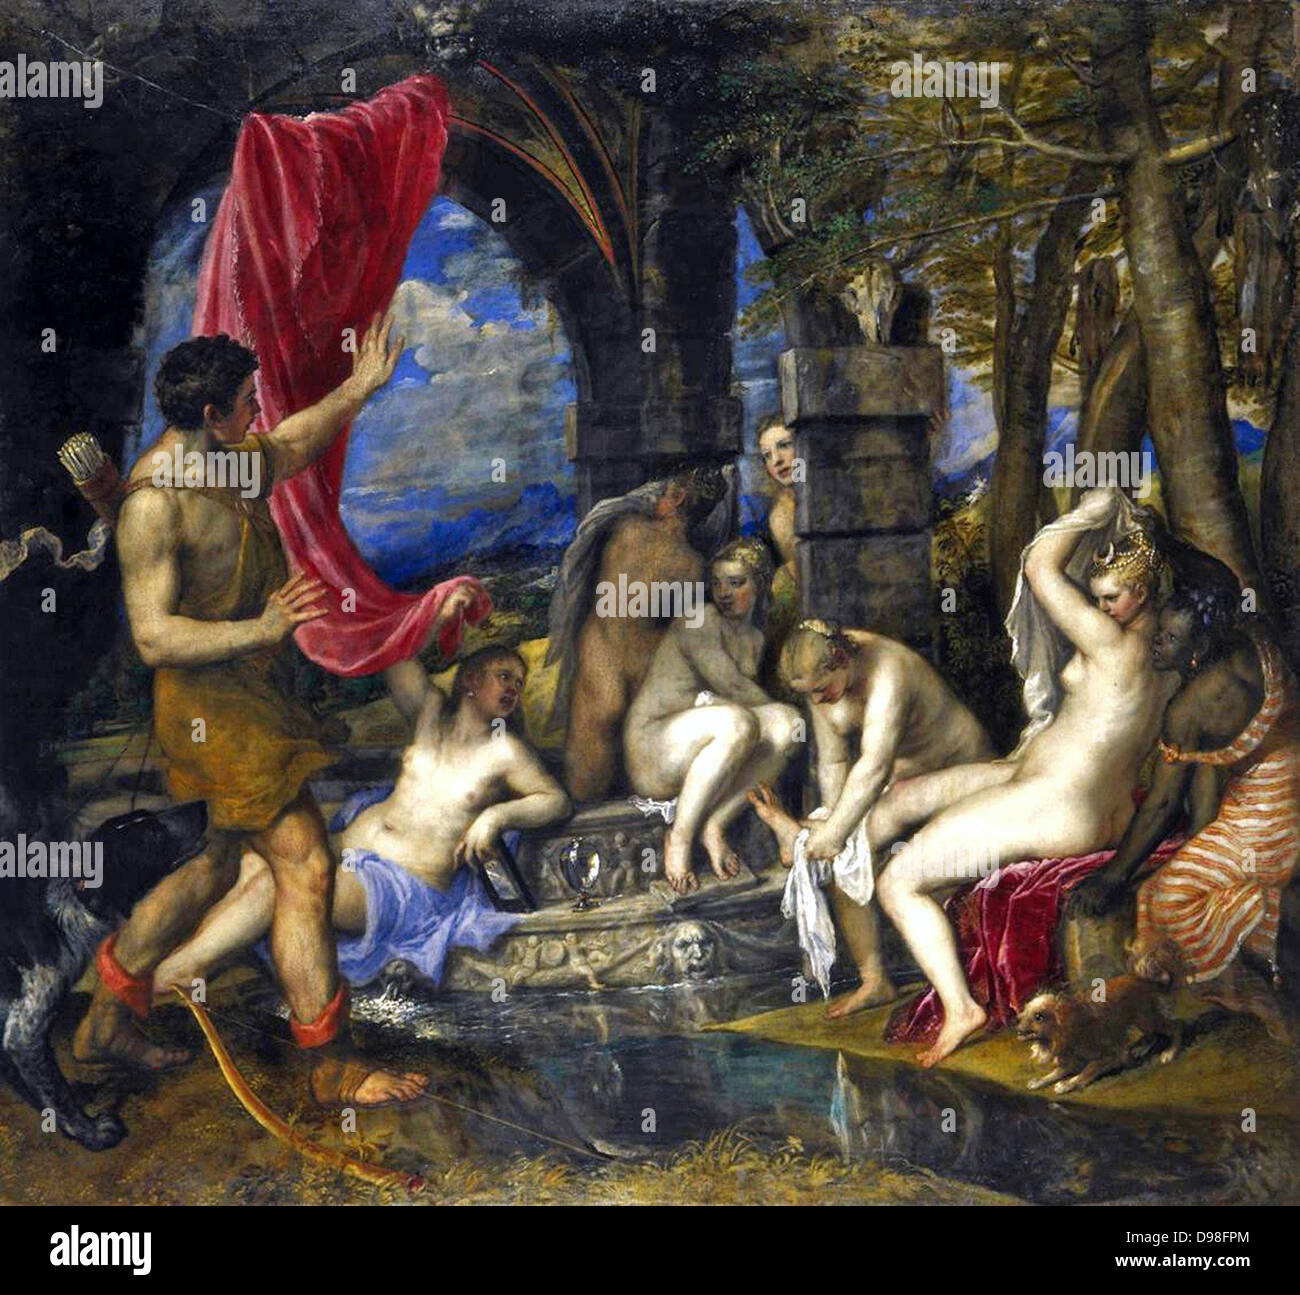 Diana and Actaeon 1556 - 1559 by Titian Stock Photo